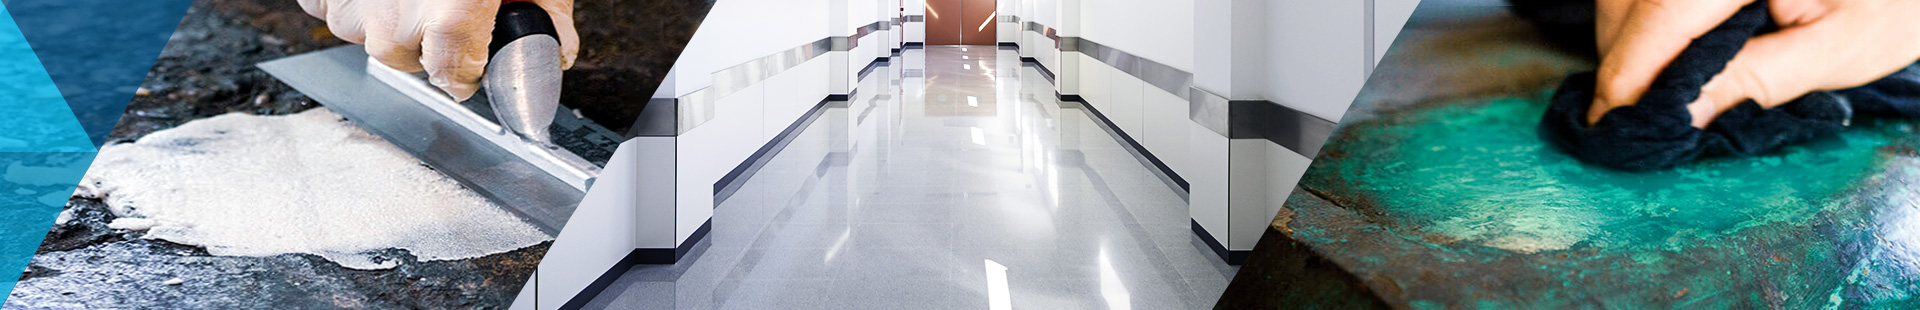 floor patch coating and cleaner